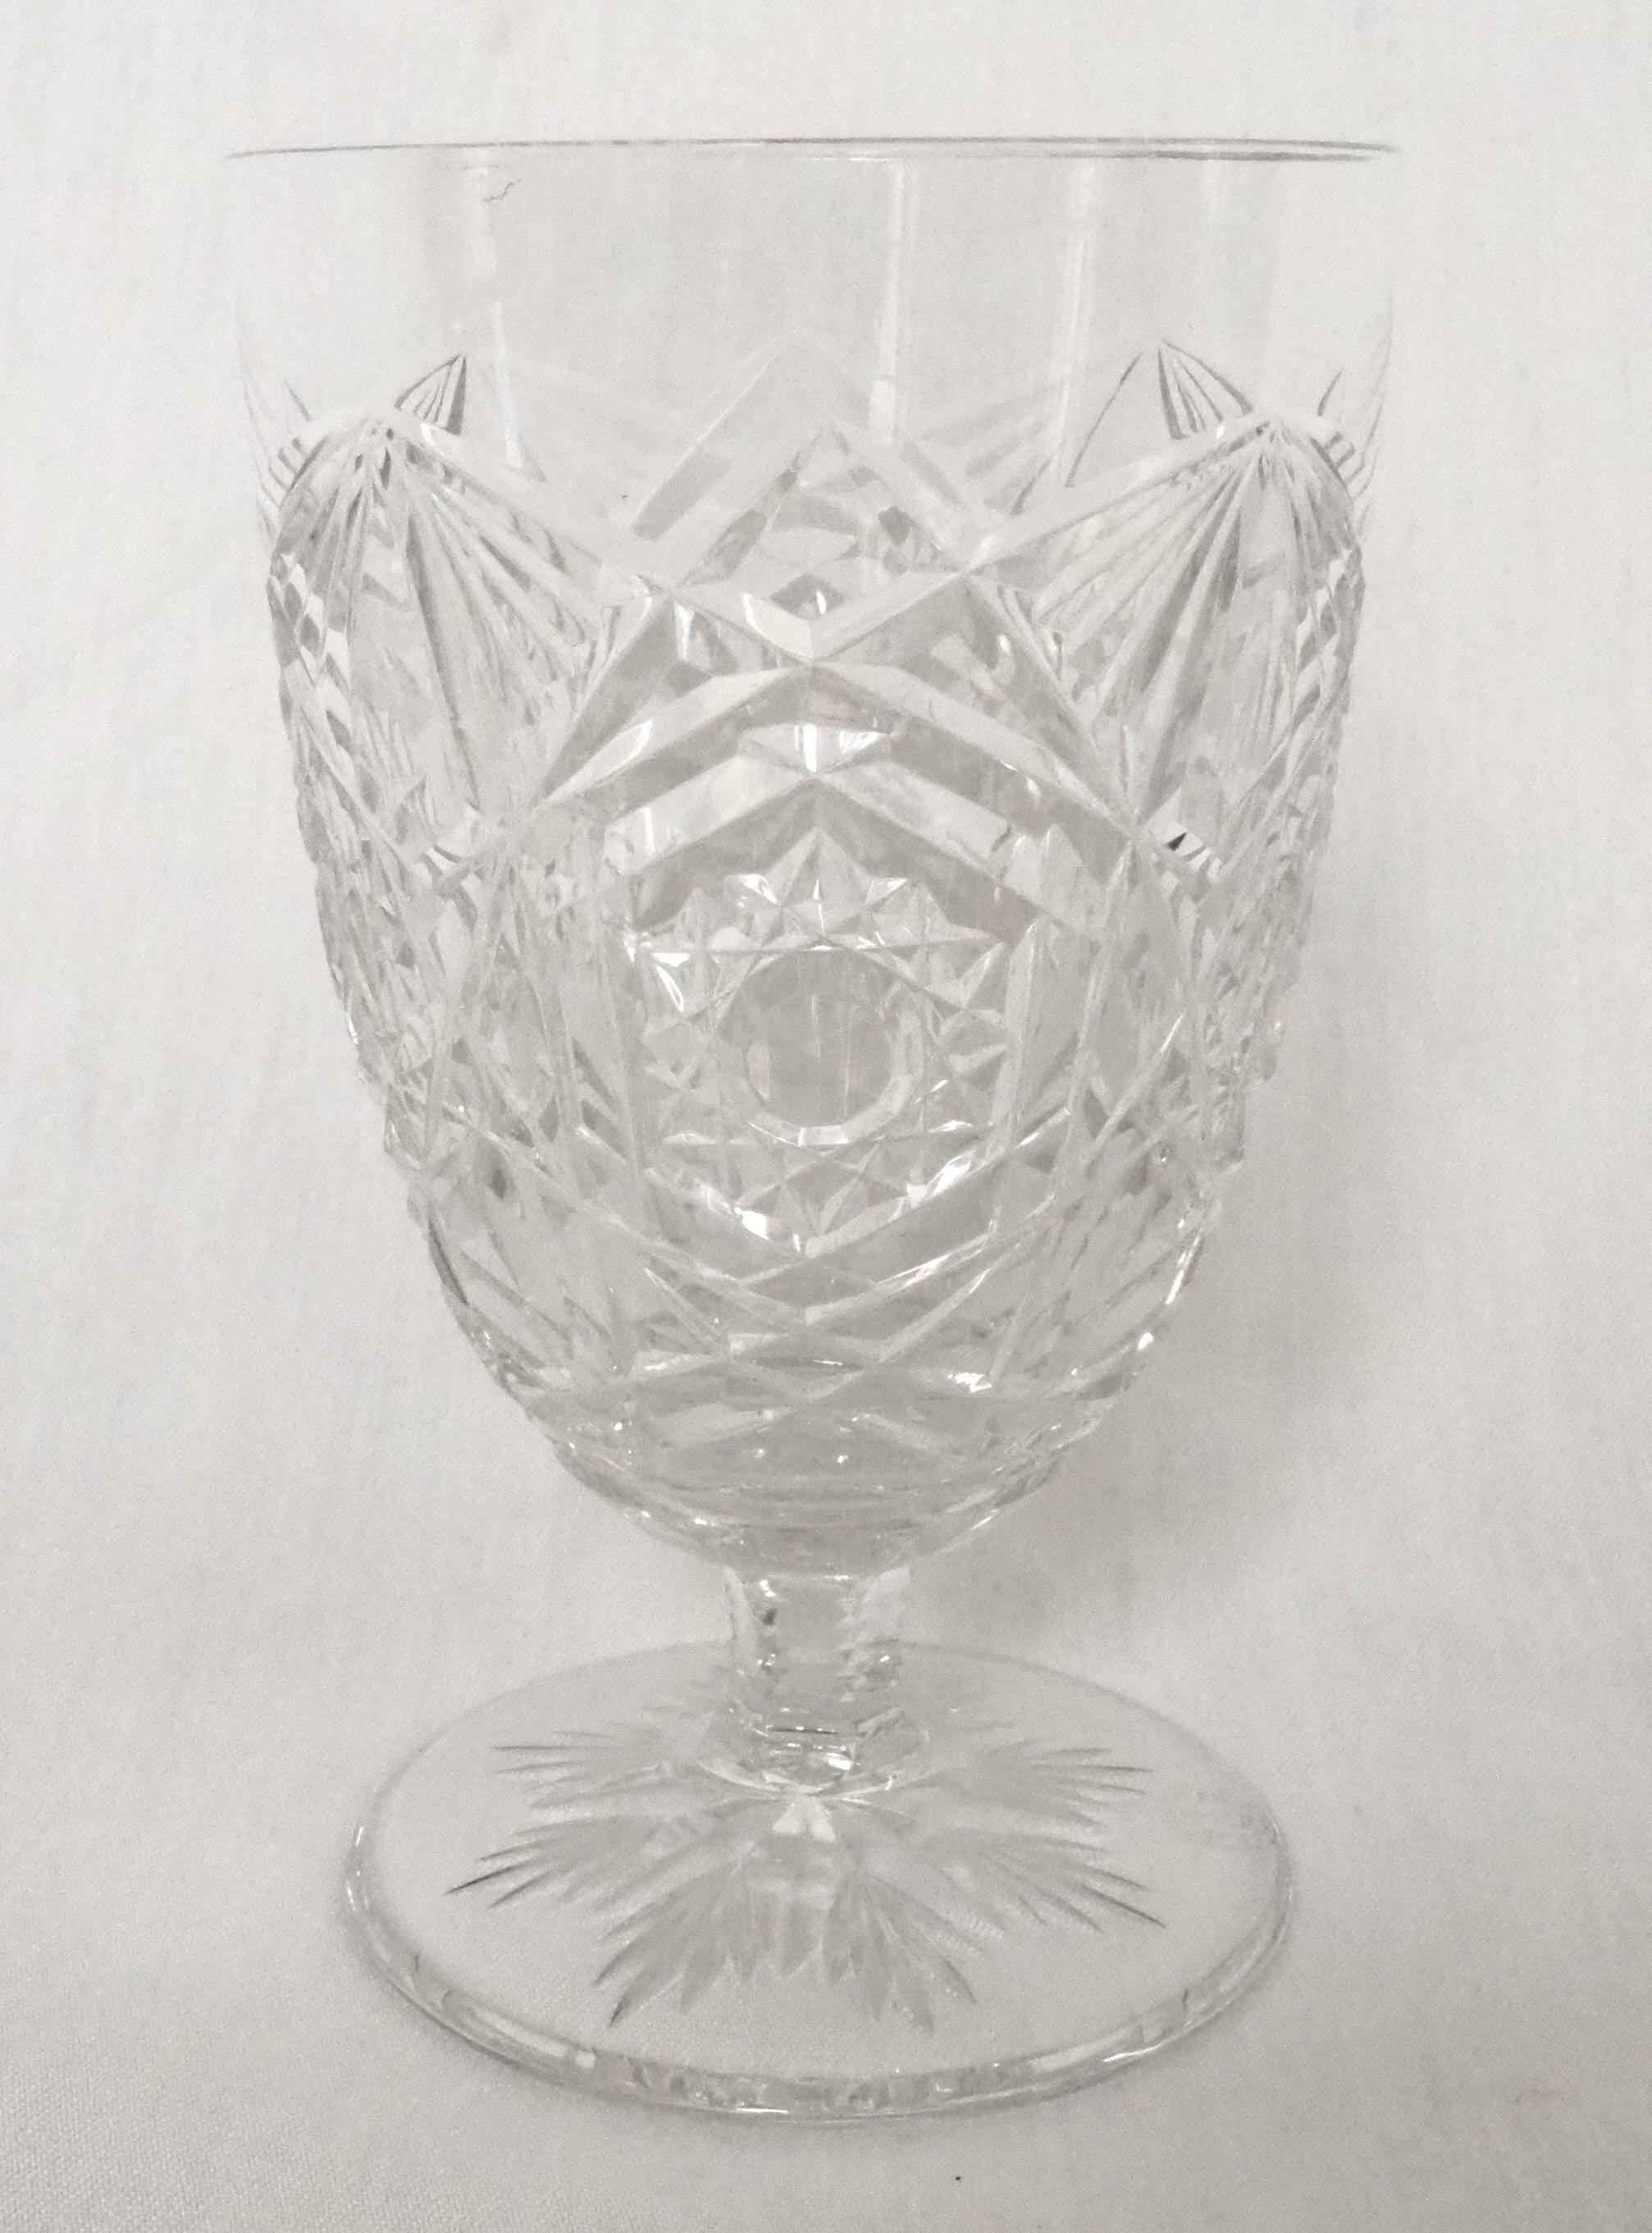 Small Baccarat crystal vase, famous Lagny pattern, one of the most luxurious model the crystal maker ever designed : a deeply cut Art Deco style pattern, base cut with a sophisticated star.

Lagny is listed in 1933 tableware catalog. It is a